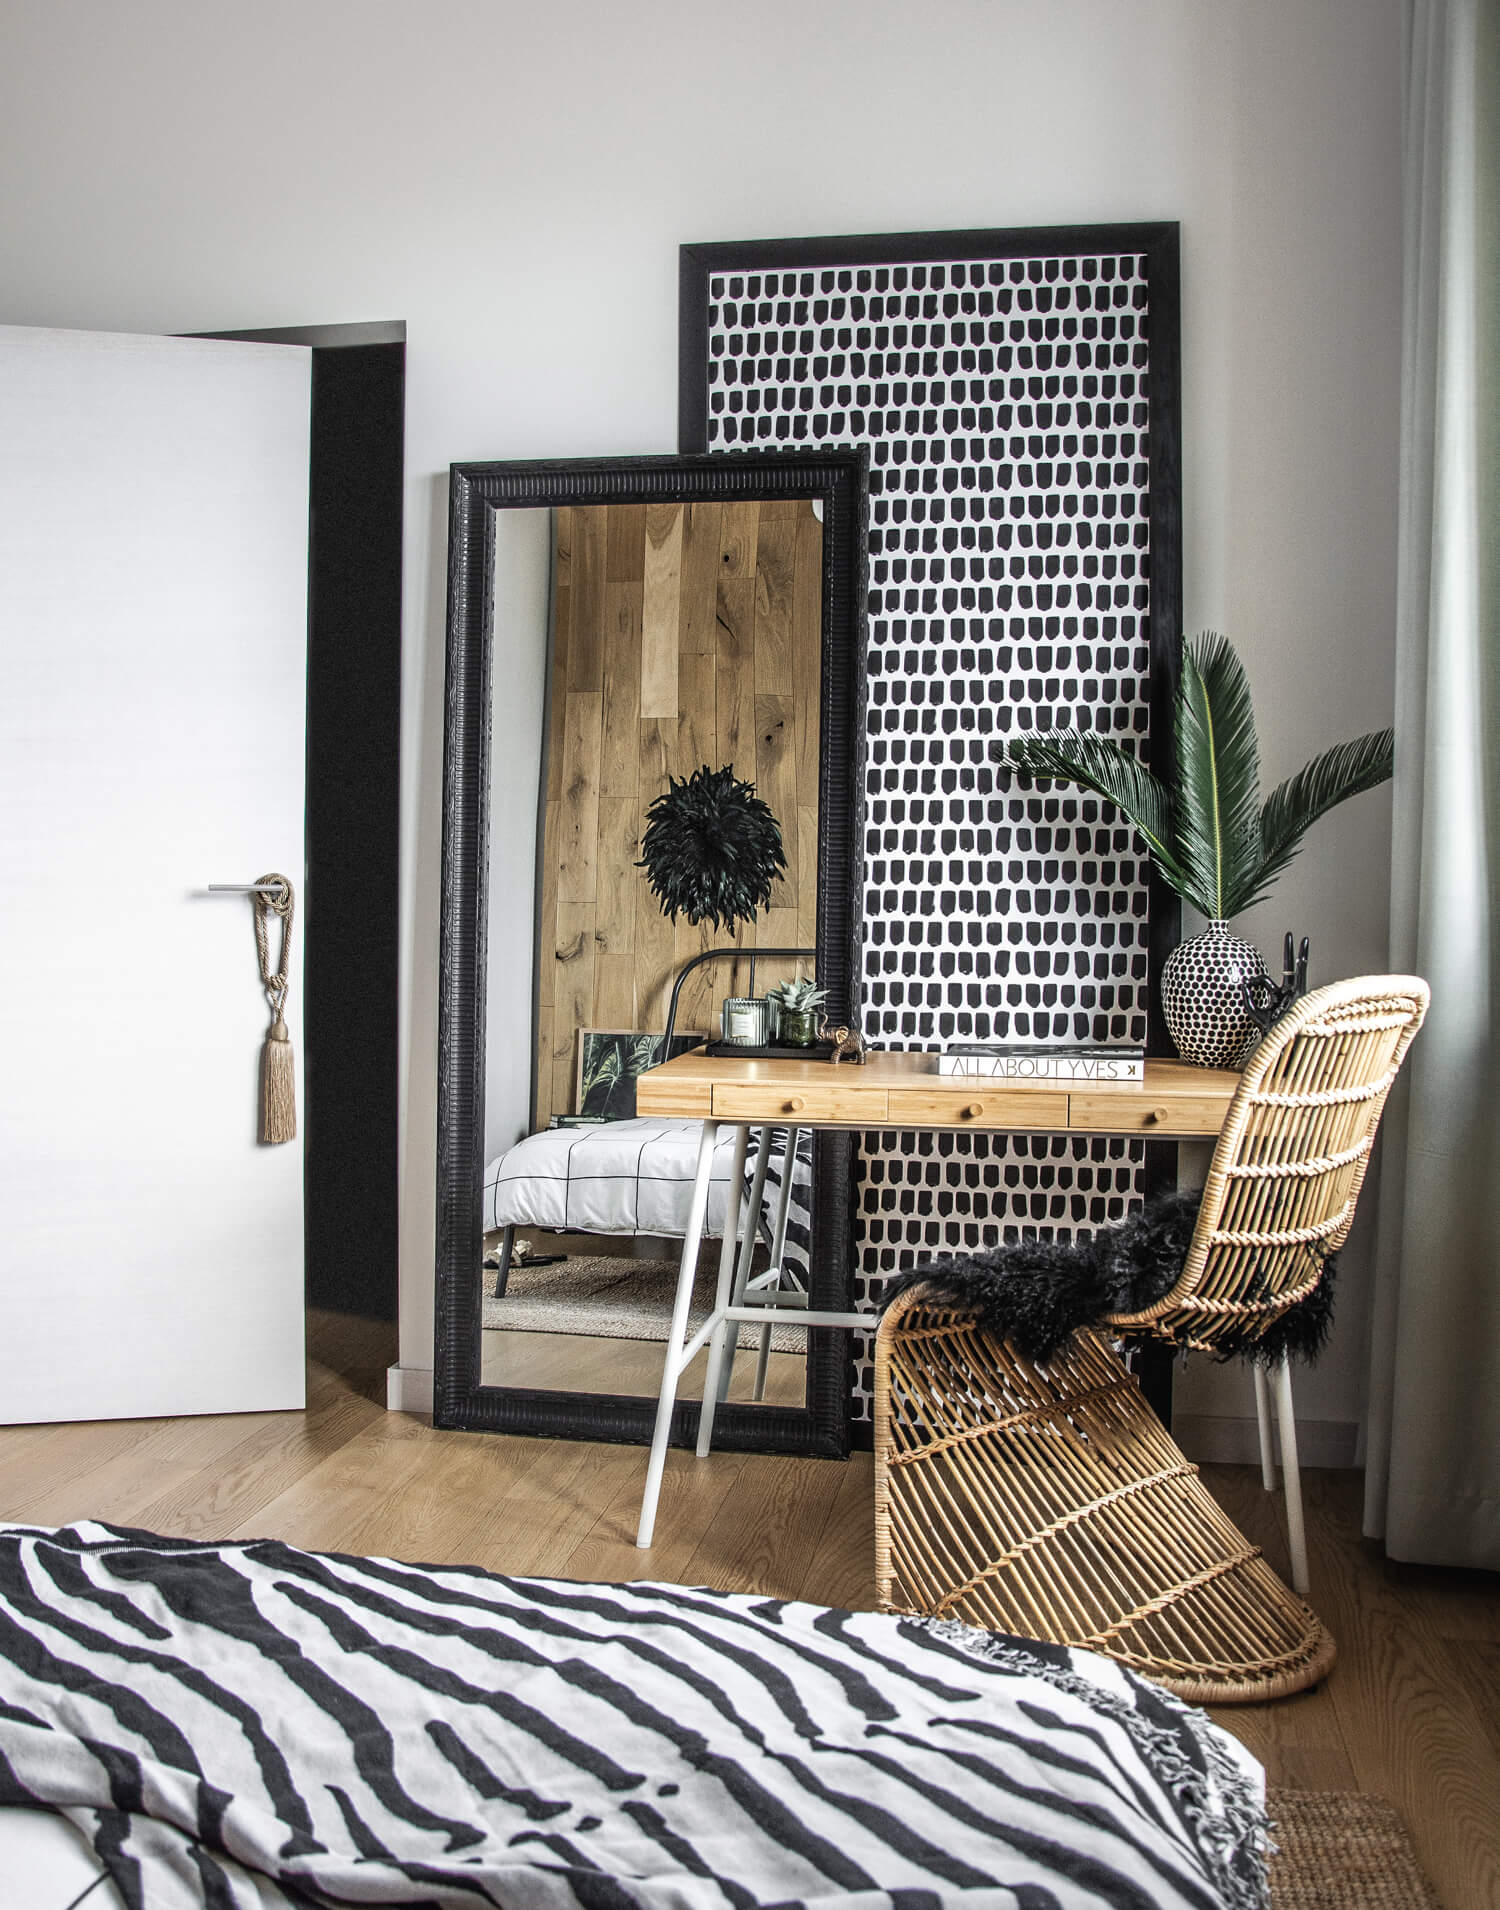 Modern safari inspired bohemian bedroom interior. Pattern mixing and large scale art in bedroom interior. One Room Challenge 2019.